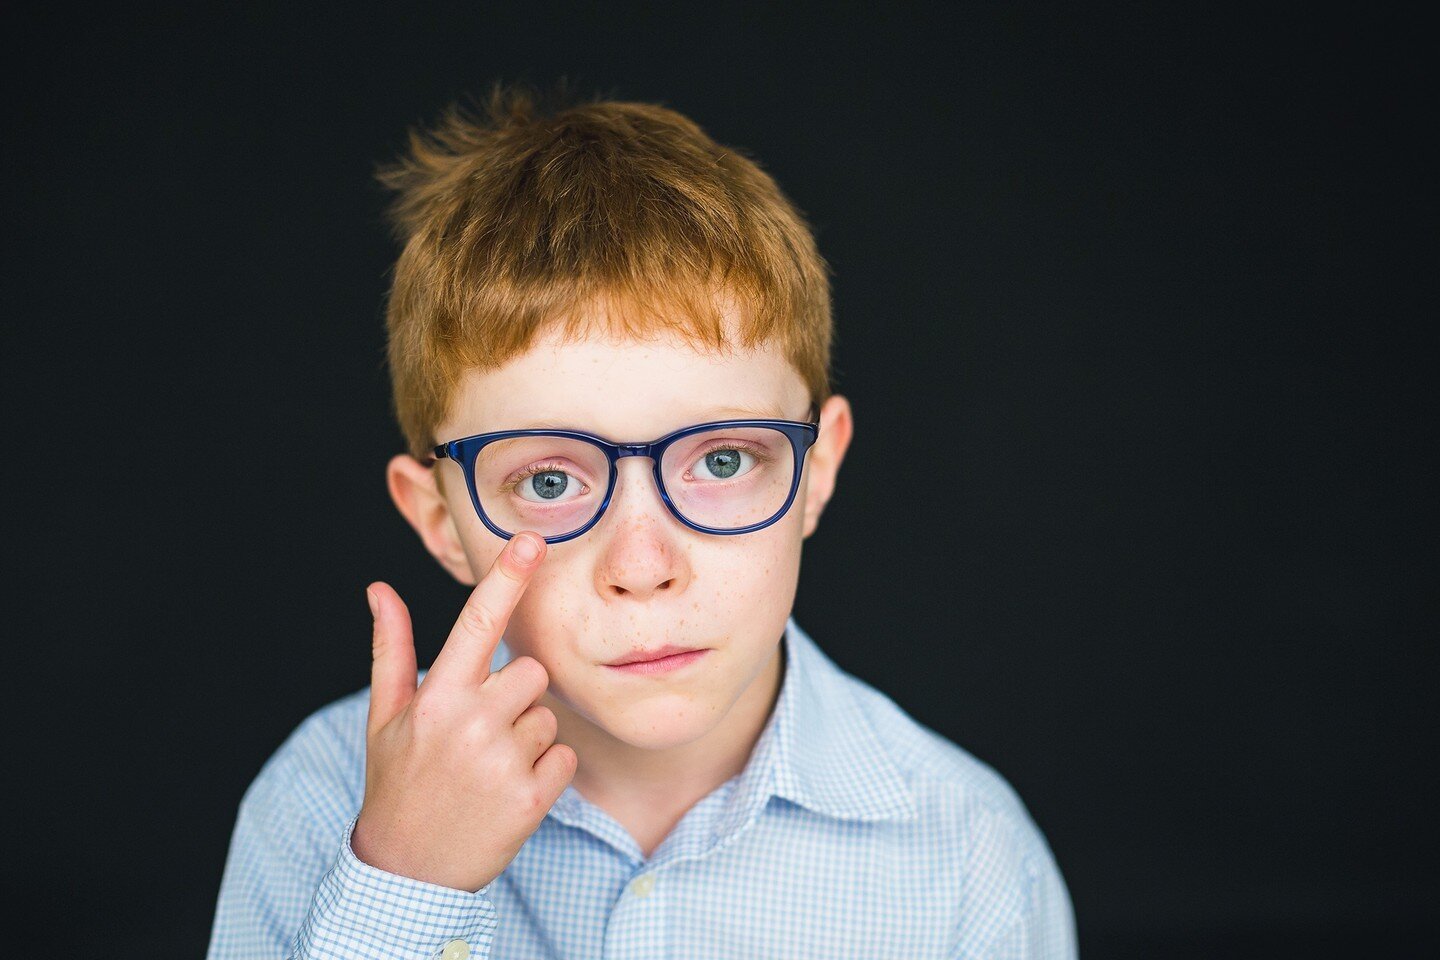 As kids move into elementary school and beyond, some start to need glasses. Quickly, frames become a big part of who they are. ⁠
⁠
My own son wears glasses, and he simply doesn't look like himself without them (although I do secretly love when he for